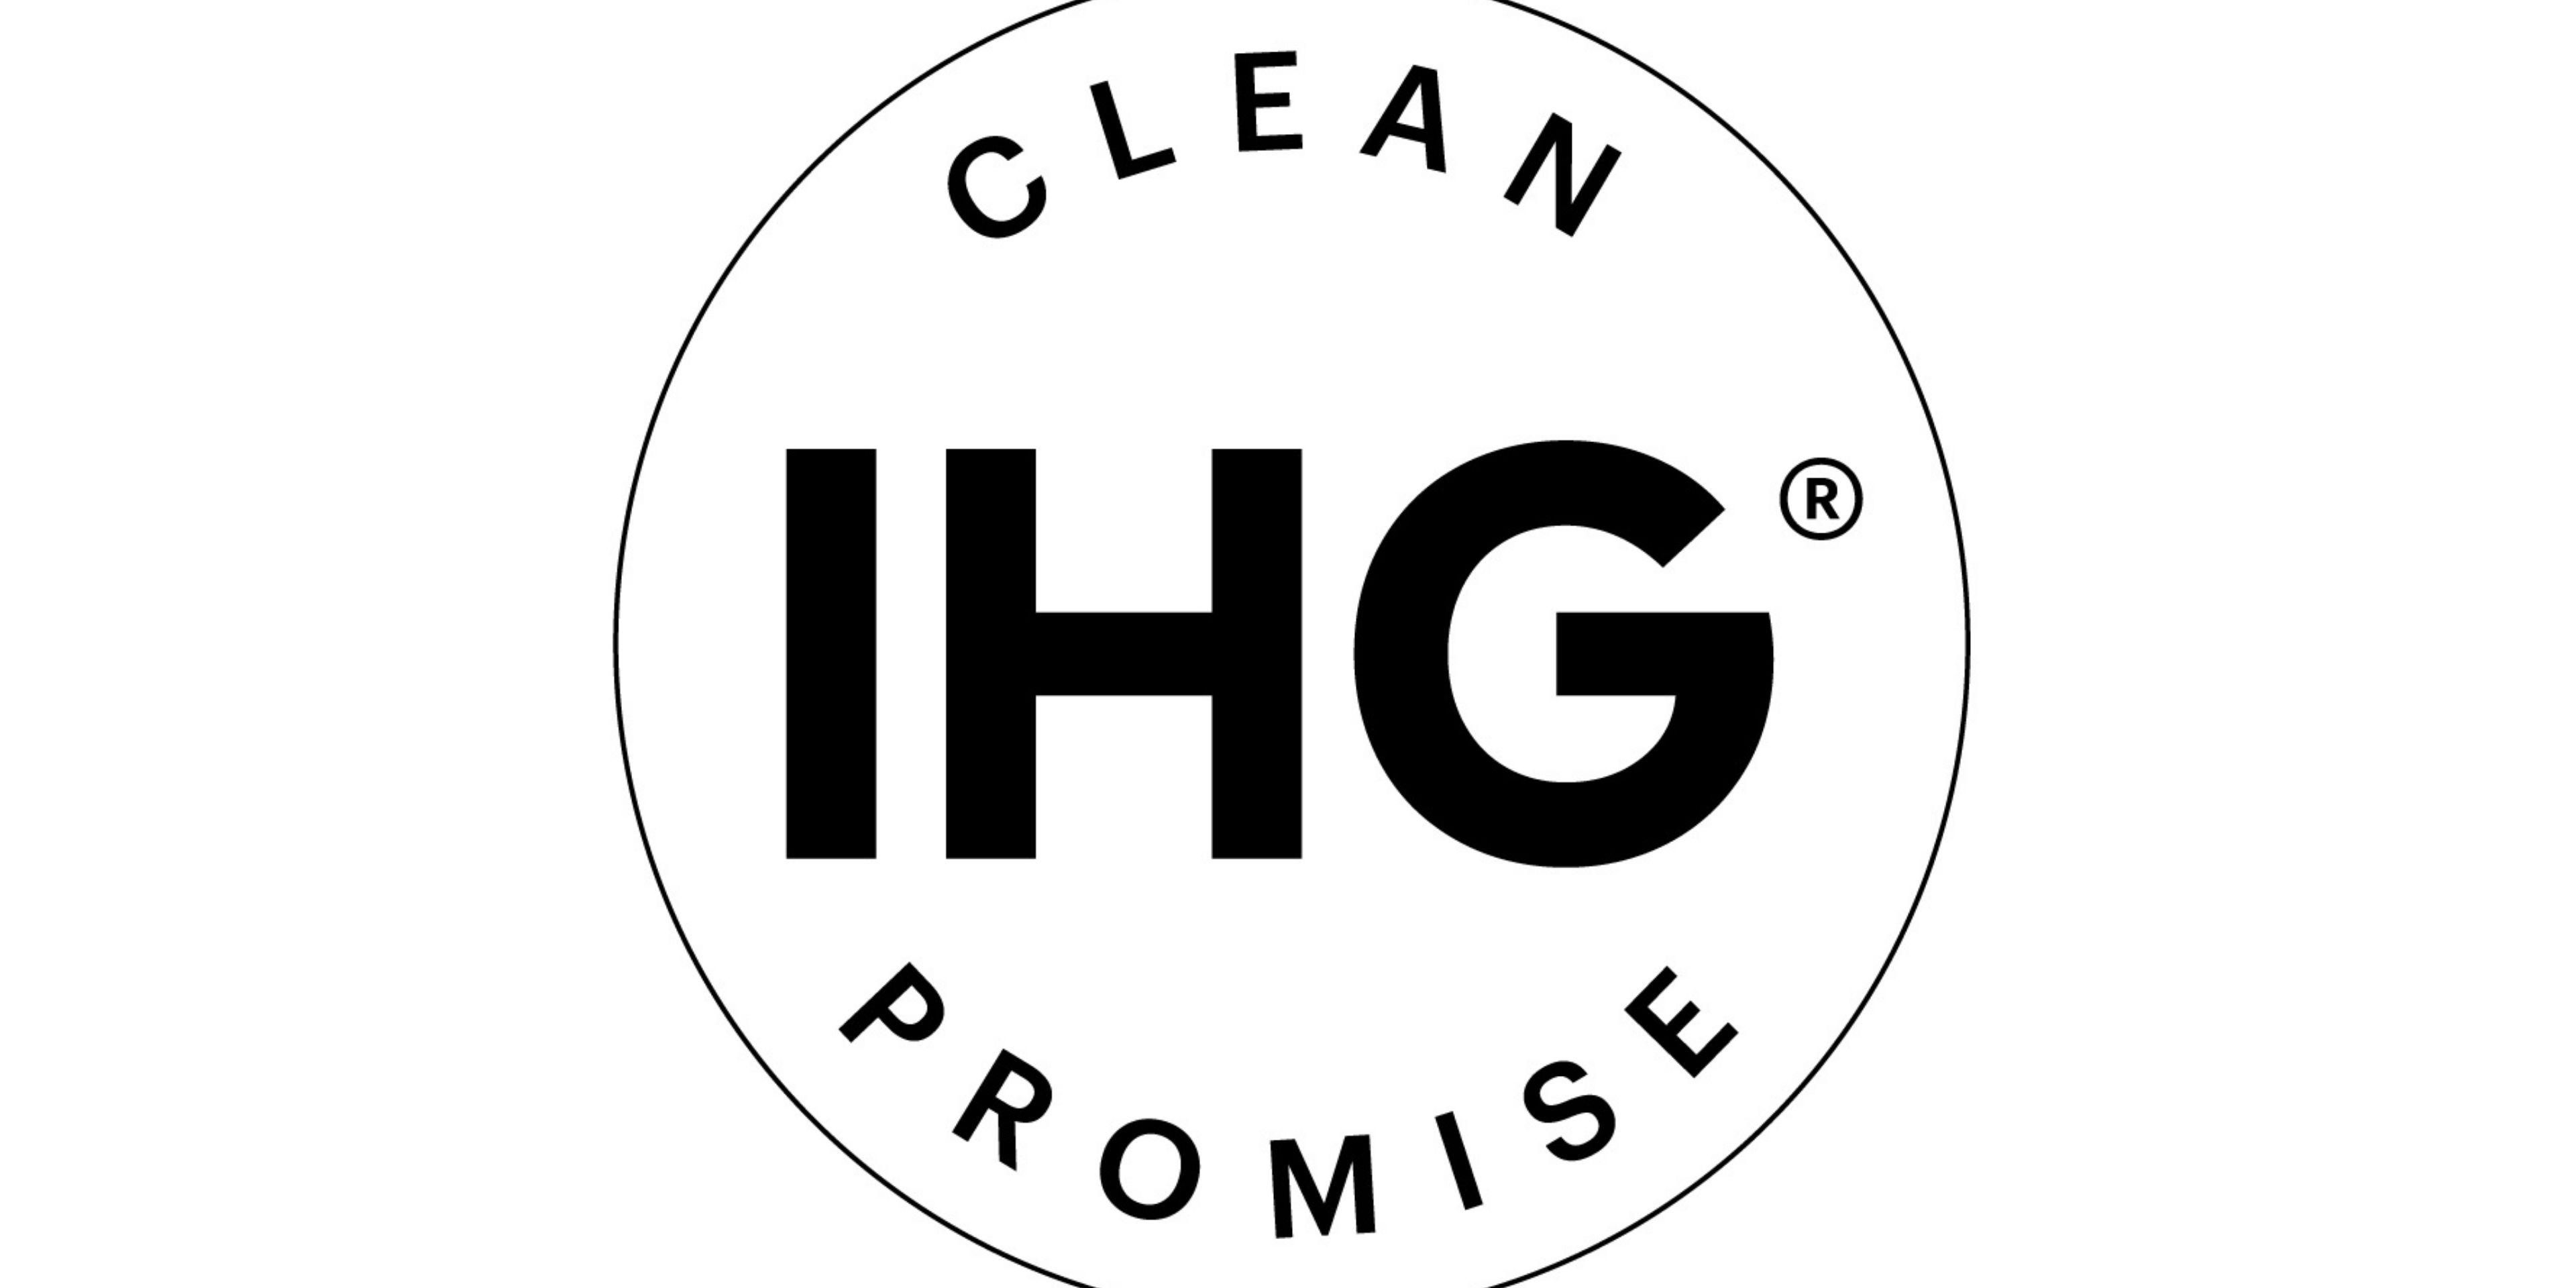 IHG Way of Clean includes deep cleaning with hospital-grade disinfectants and guests can expect to see enhanced procedures, which include face-covering requirements, various ways to reduce contact throughout the hotel, social distancing measures within public spaces, and procedures based on local authorities guidance and/or advice.